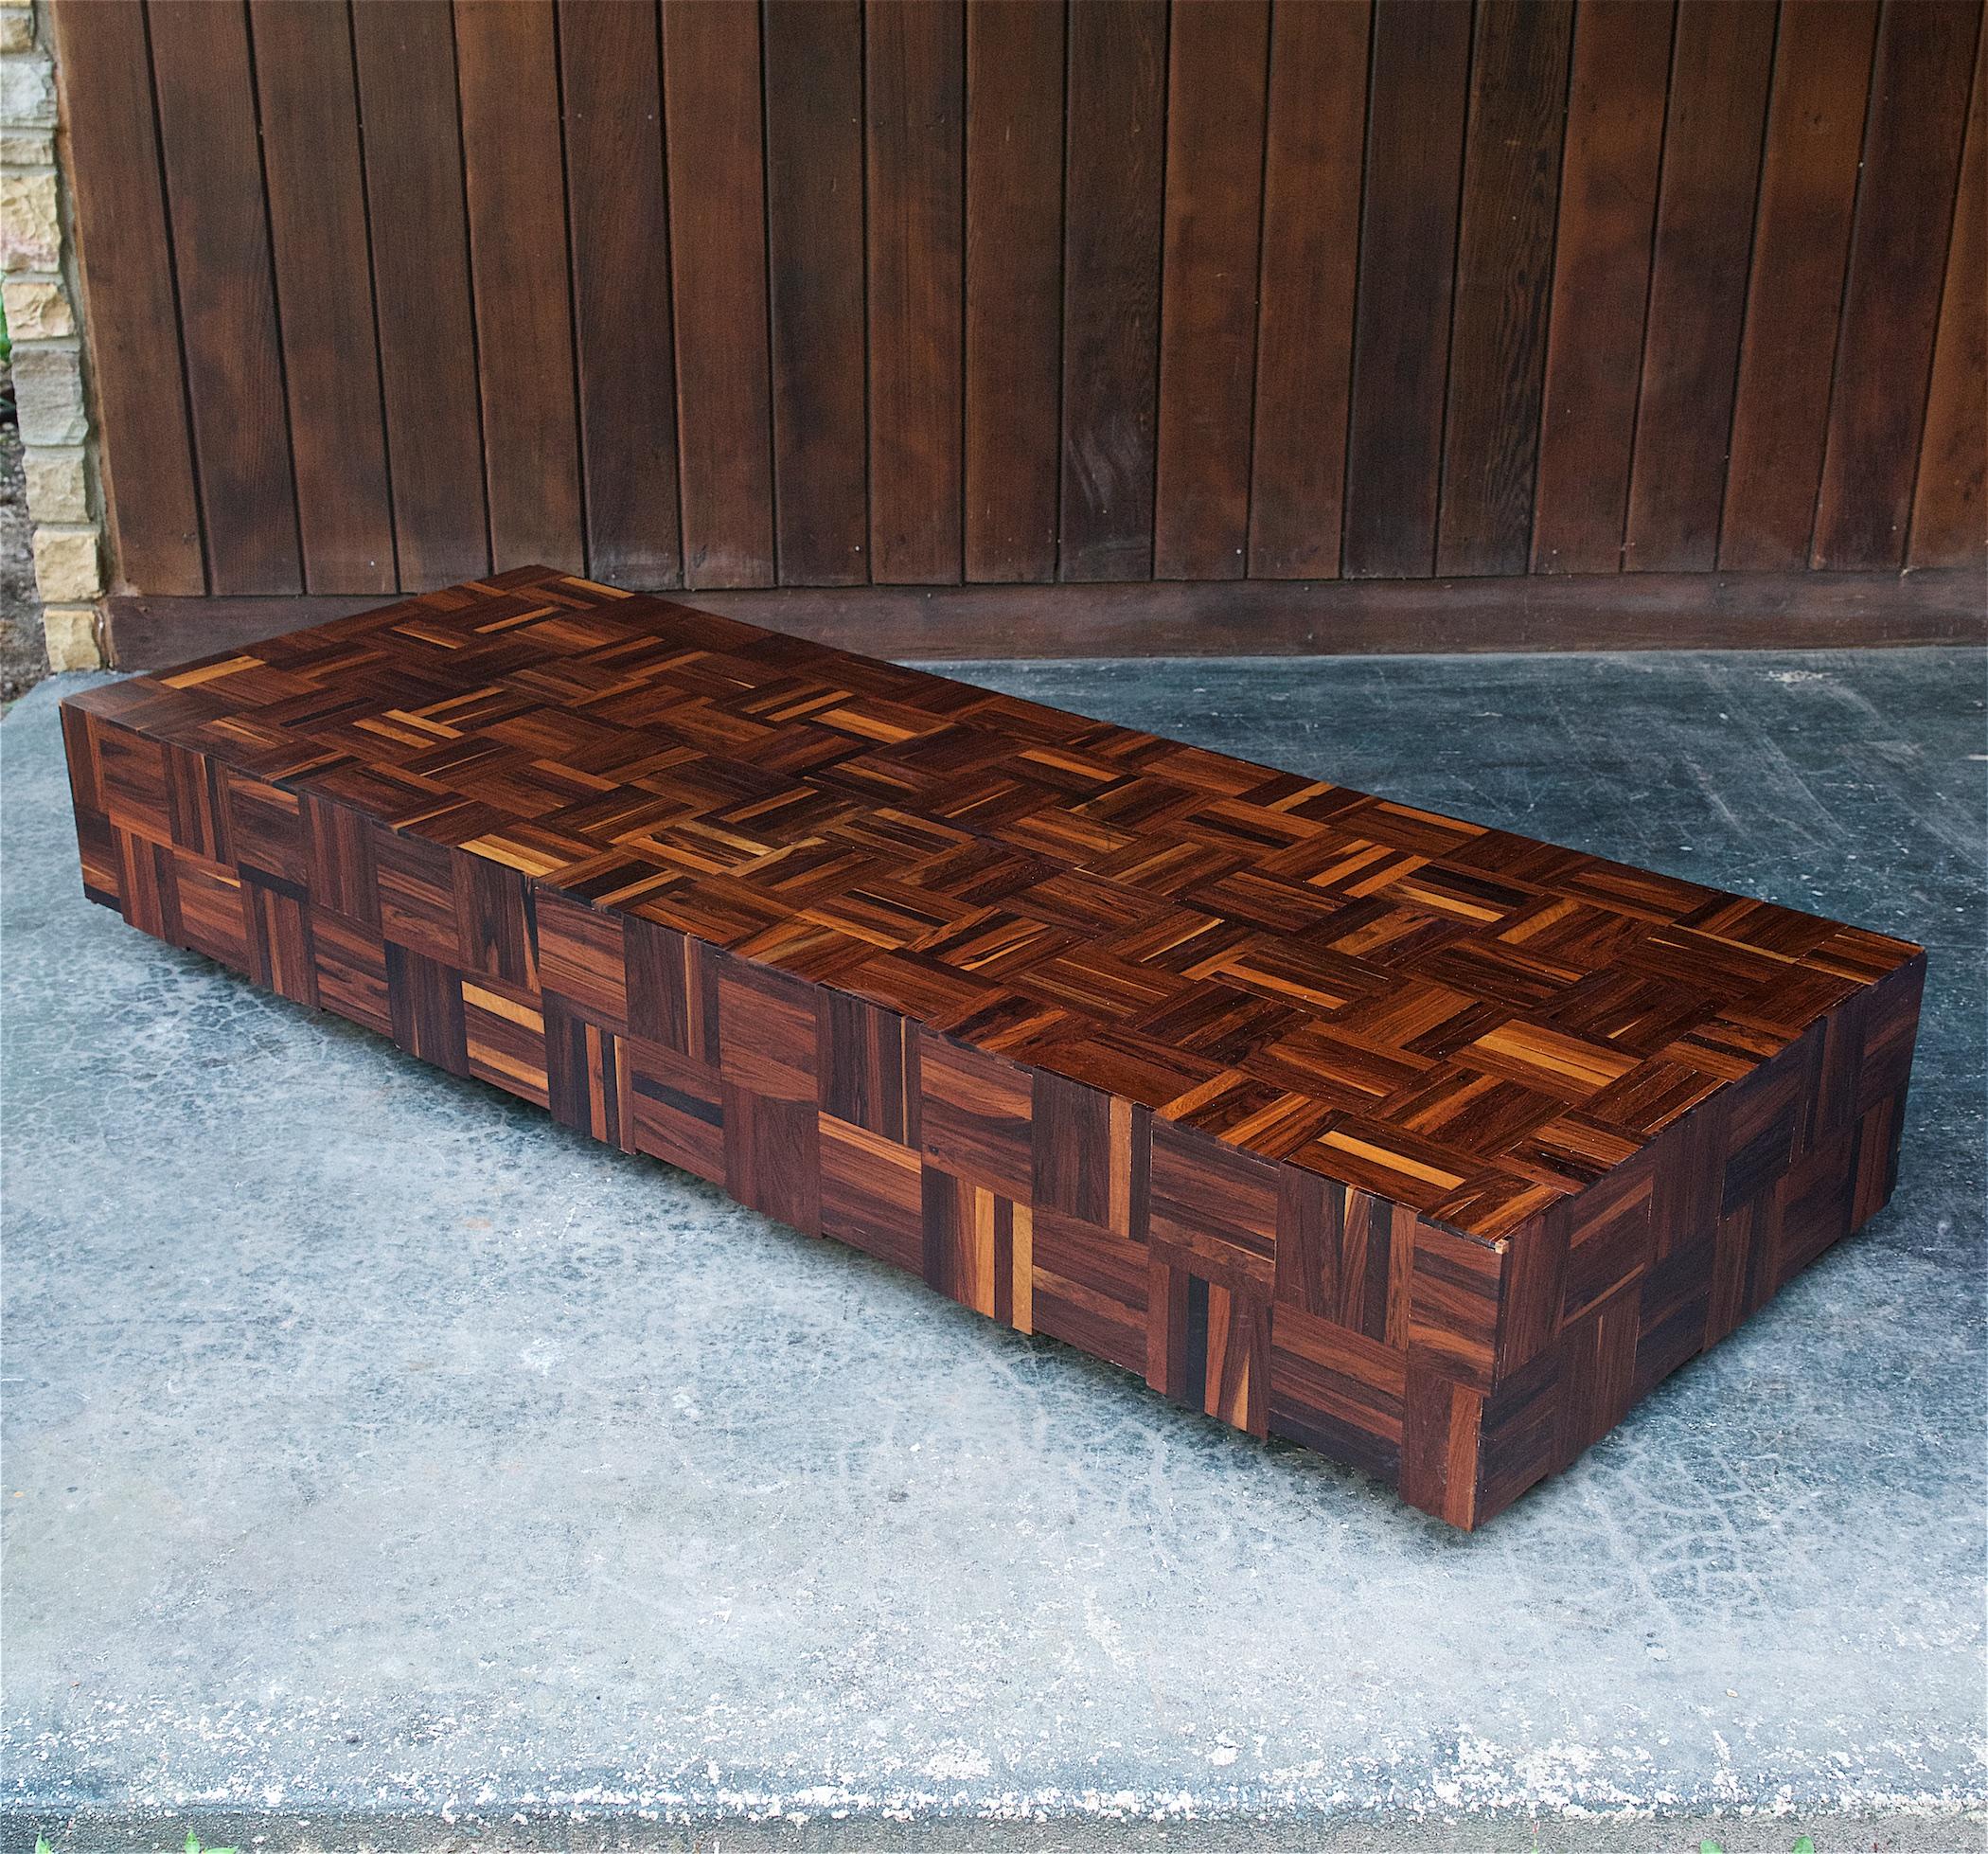 Monumental American Studio Craft piece of furniture. Perhaps a custom piece for a large conversation pit. Who knows? Anyway, we cleaned it up, and it is ready for a new life. The wood appears to be Brazilian Rosewood (Jacaranda) or Brazilian Cherry.